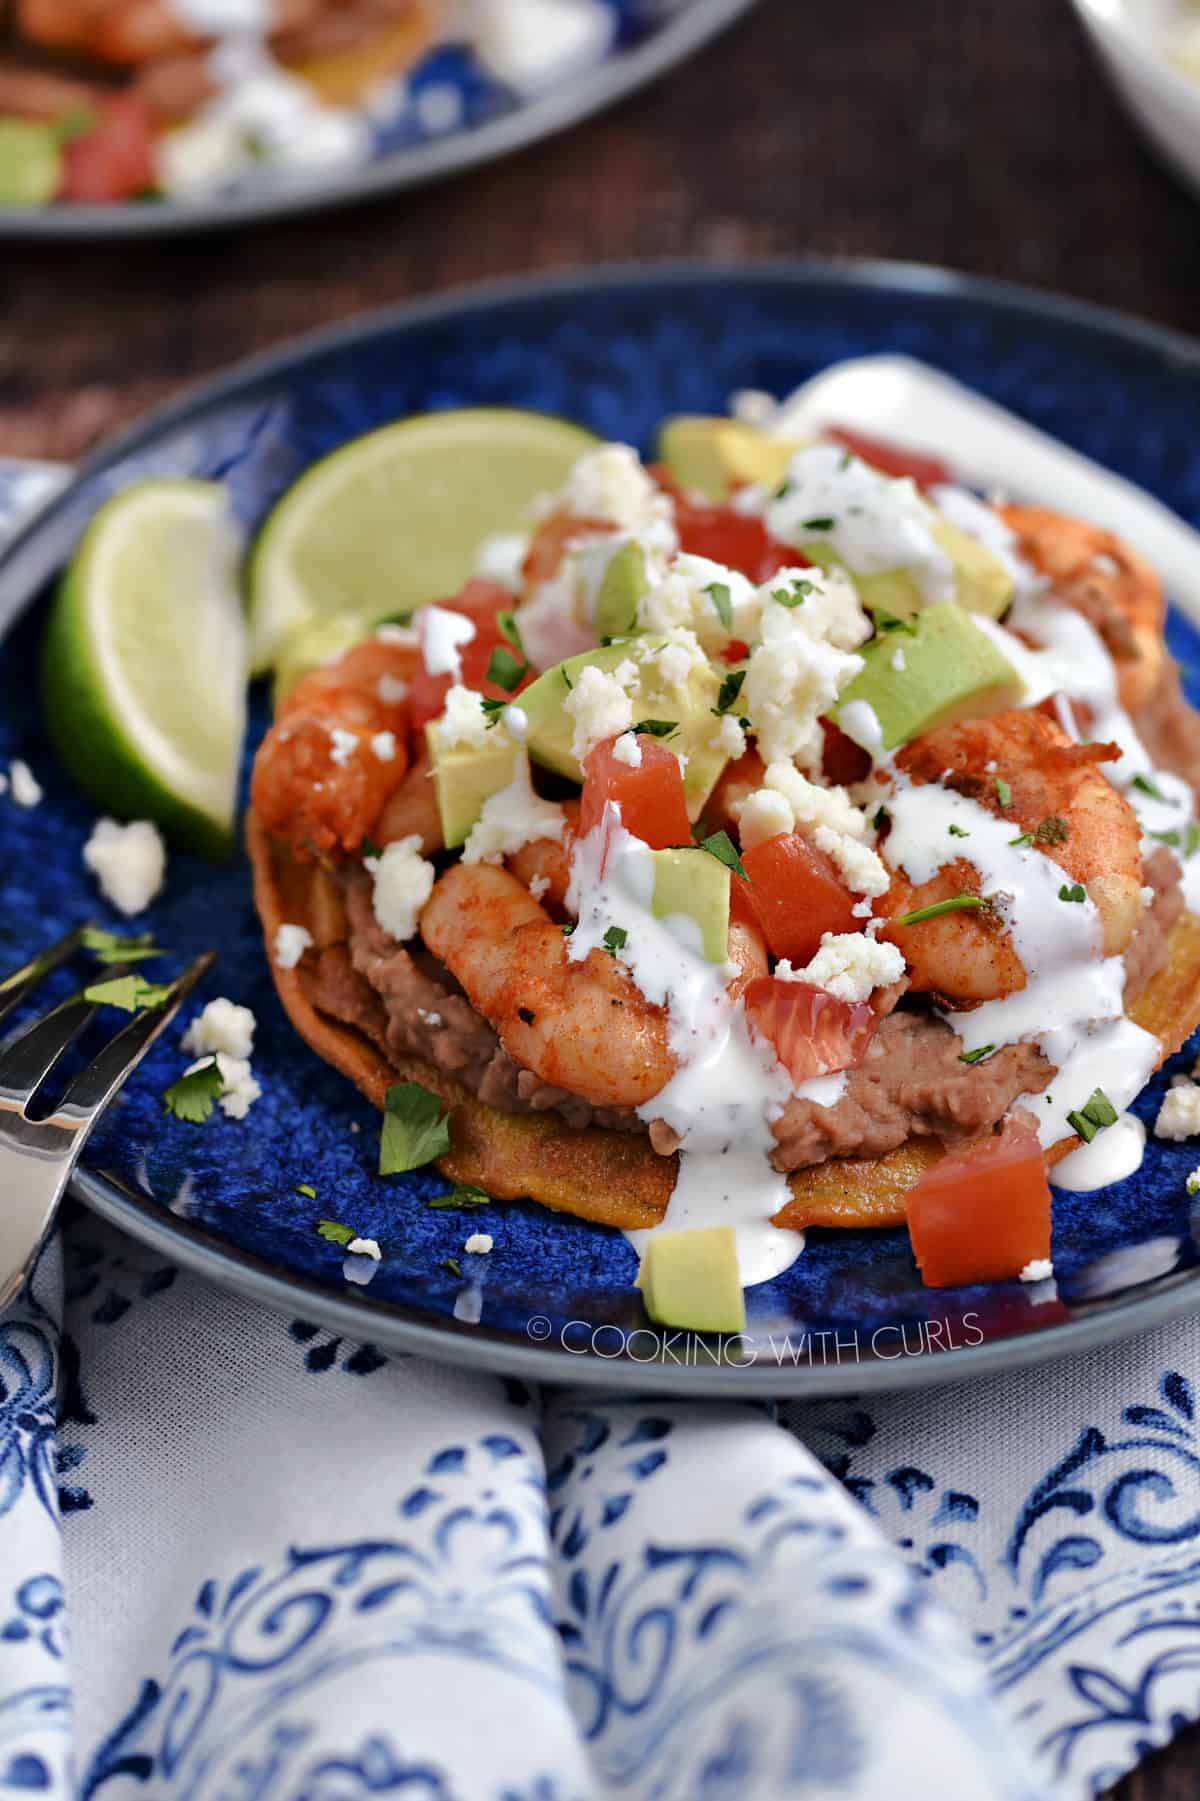 Shrimp, diced tomatoes, onions and avocado on a bed of refried beans on a corn tortilla drizzled with crema and crumbled cheese on a blue plate.